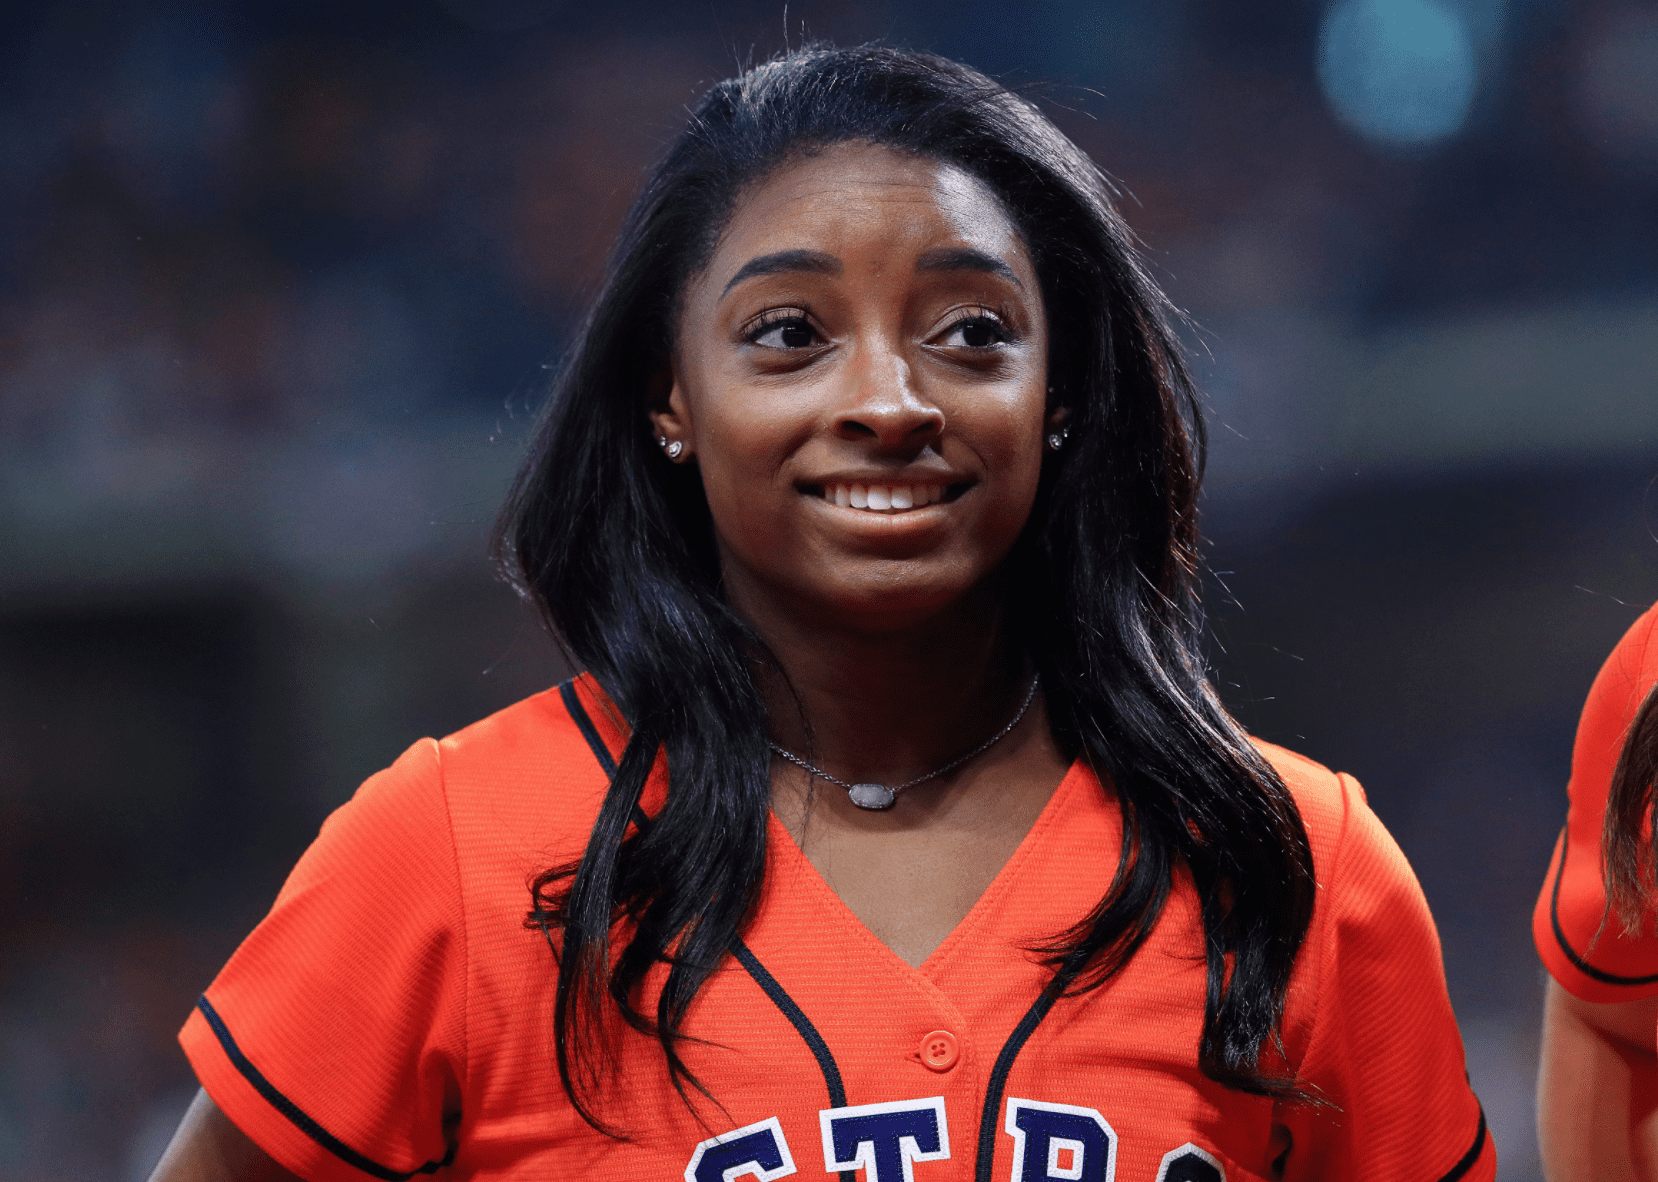 Simone Biles at a game between the Houston Astros and the Washington Nationals on October 23, 2019. | Source: Getty Images